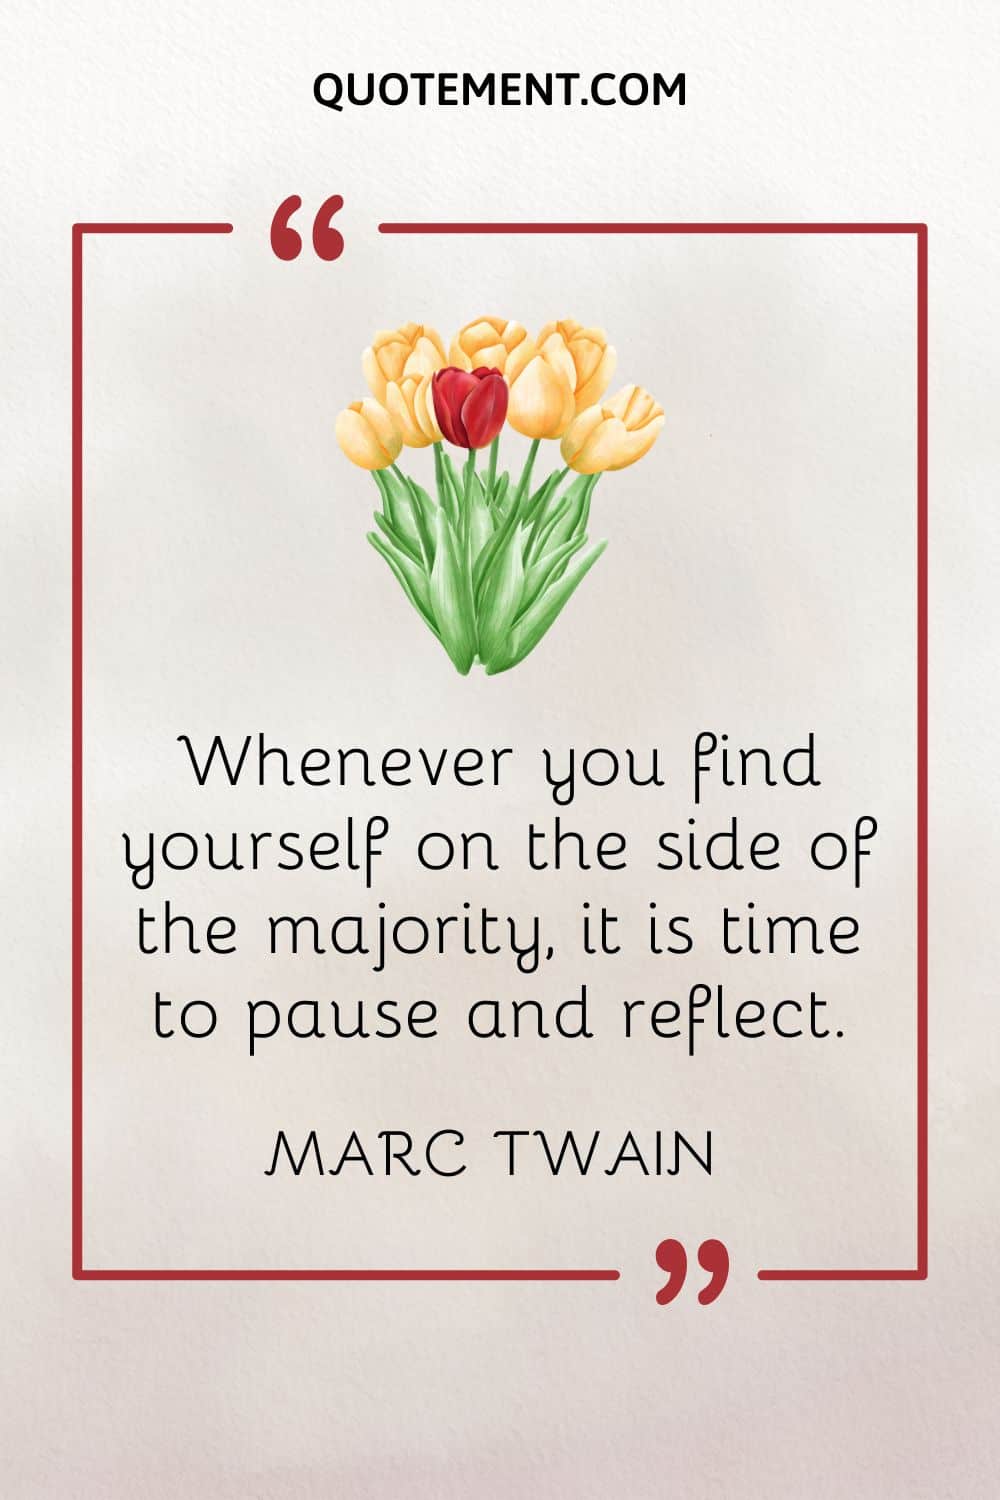 Whenever you find yourself on the side of the majority, it is time to pause and reflect